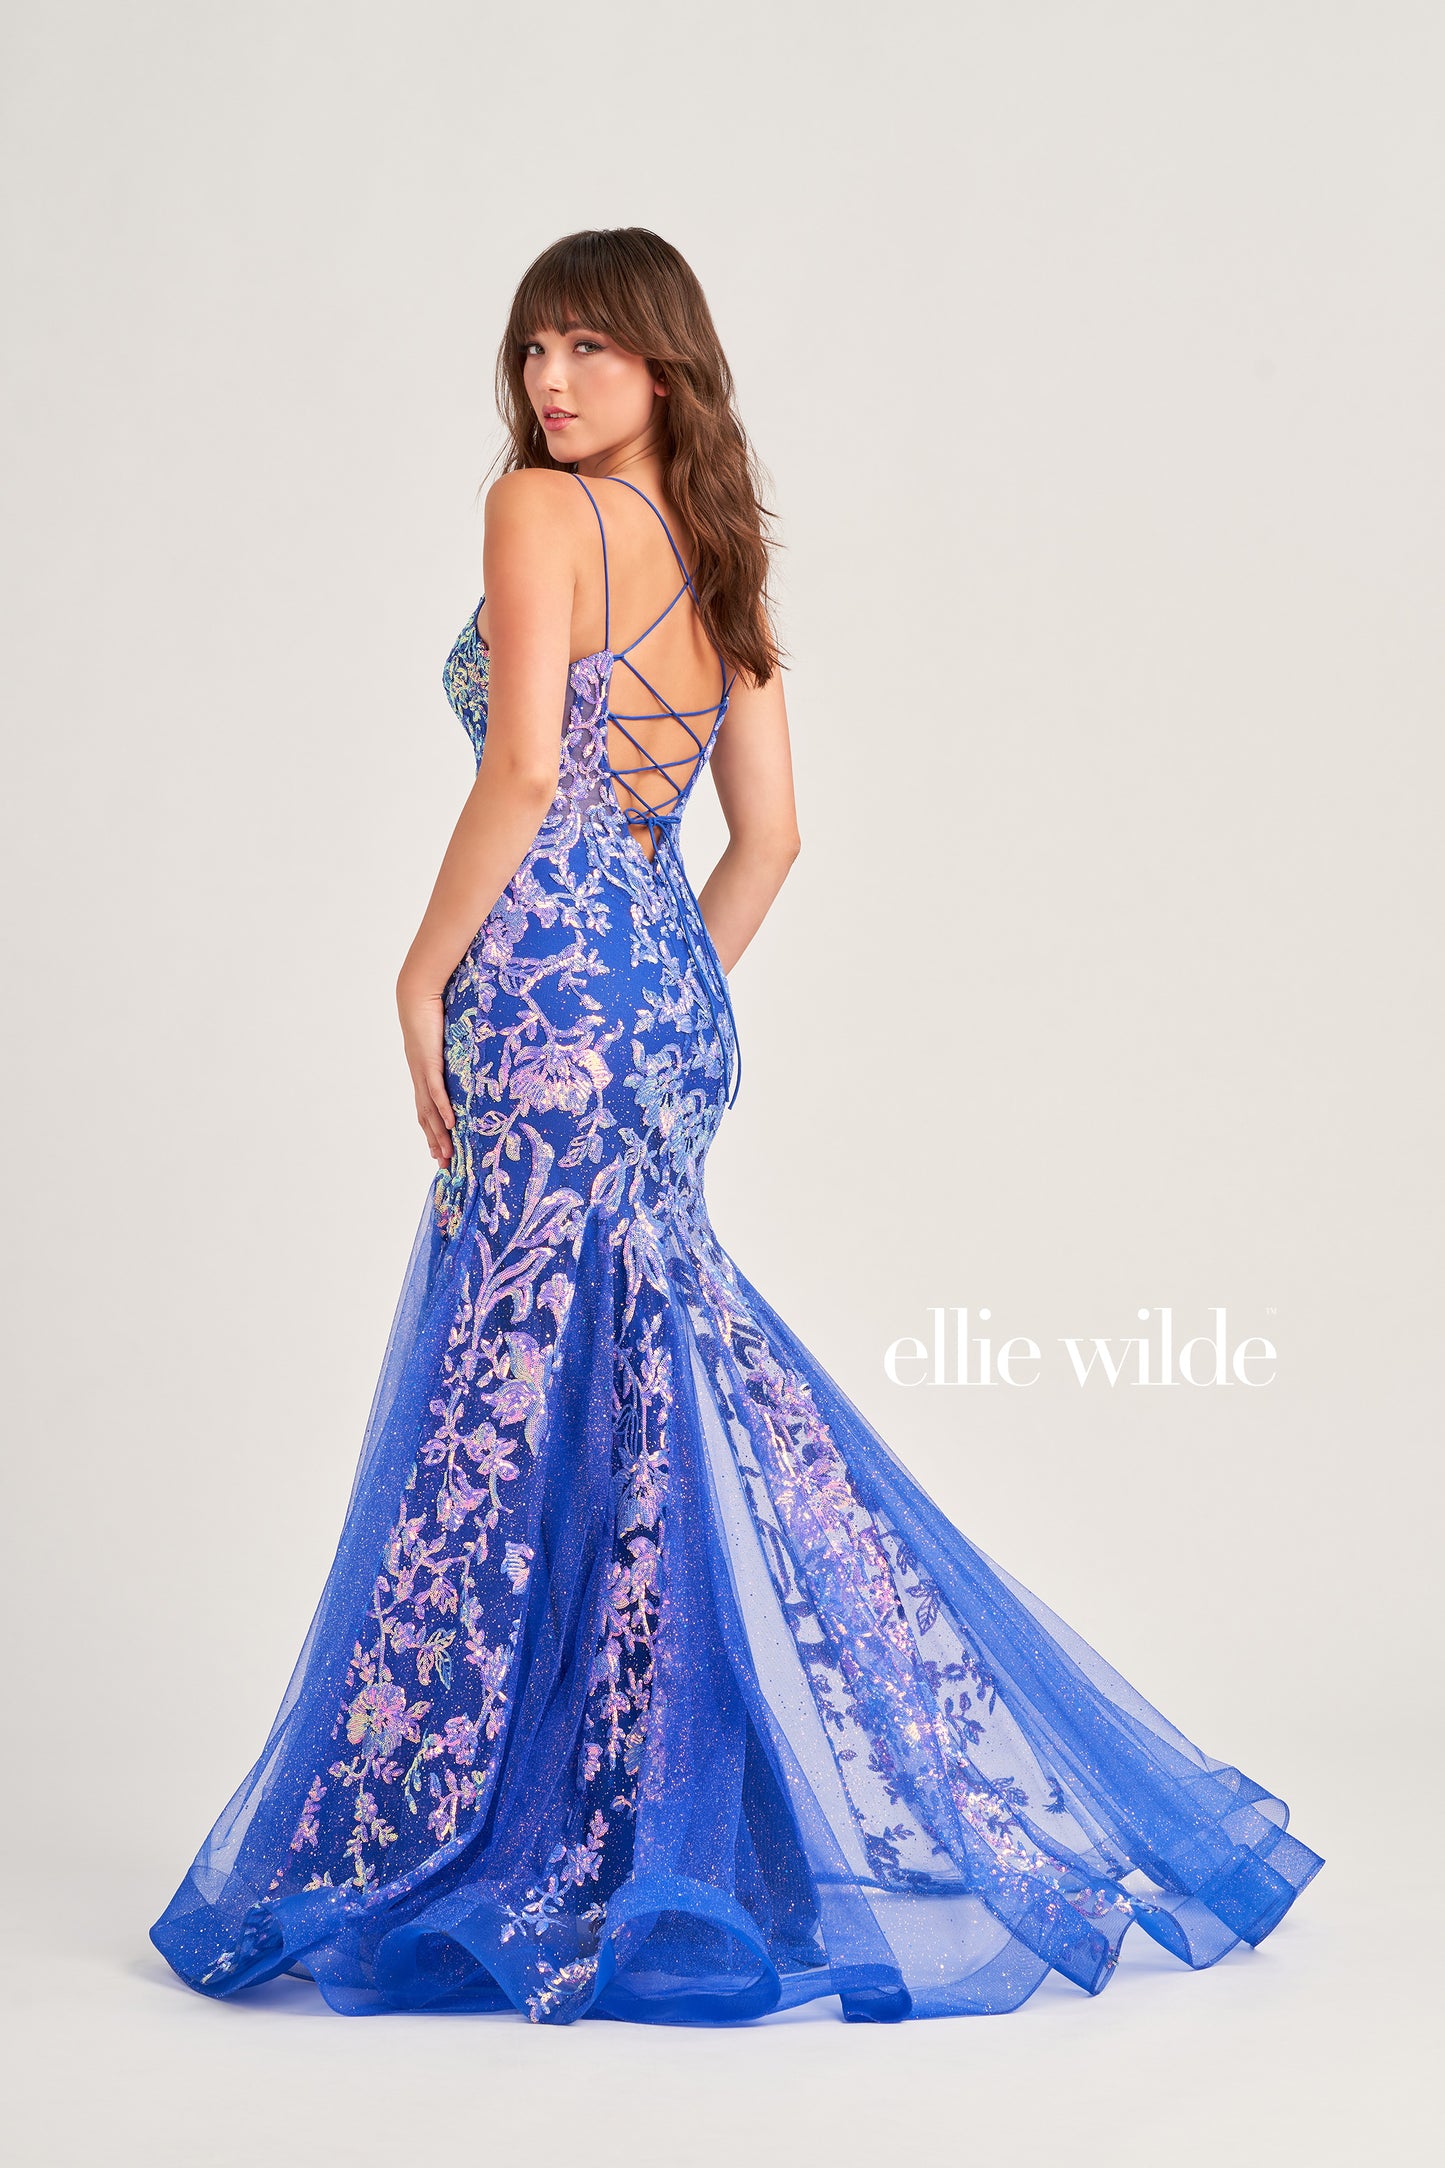 Show up in style with the Ellie Wilde EW35008 Long Sequin Shimmer Mermaid Prom Dress. Made with Glitter Sequin Tulle, this elegant gown has a Scoop Neckline, Sleeveless sleeves, Lace-Up back, and a Natural Waistline. Experience maximum comfort with the Side Waist Mesh Inset and Mermaid silhouette. Show off your curves in this figure-hugging dress!  COLOR: ORANGE, MAGENTA, ULTRA VIOLET, PERIWINKLE/OPAL SIZE: 00 - 20